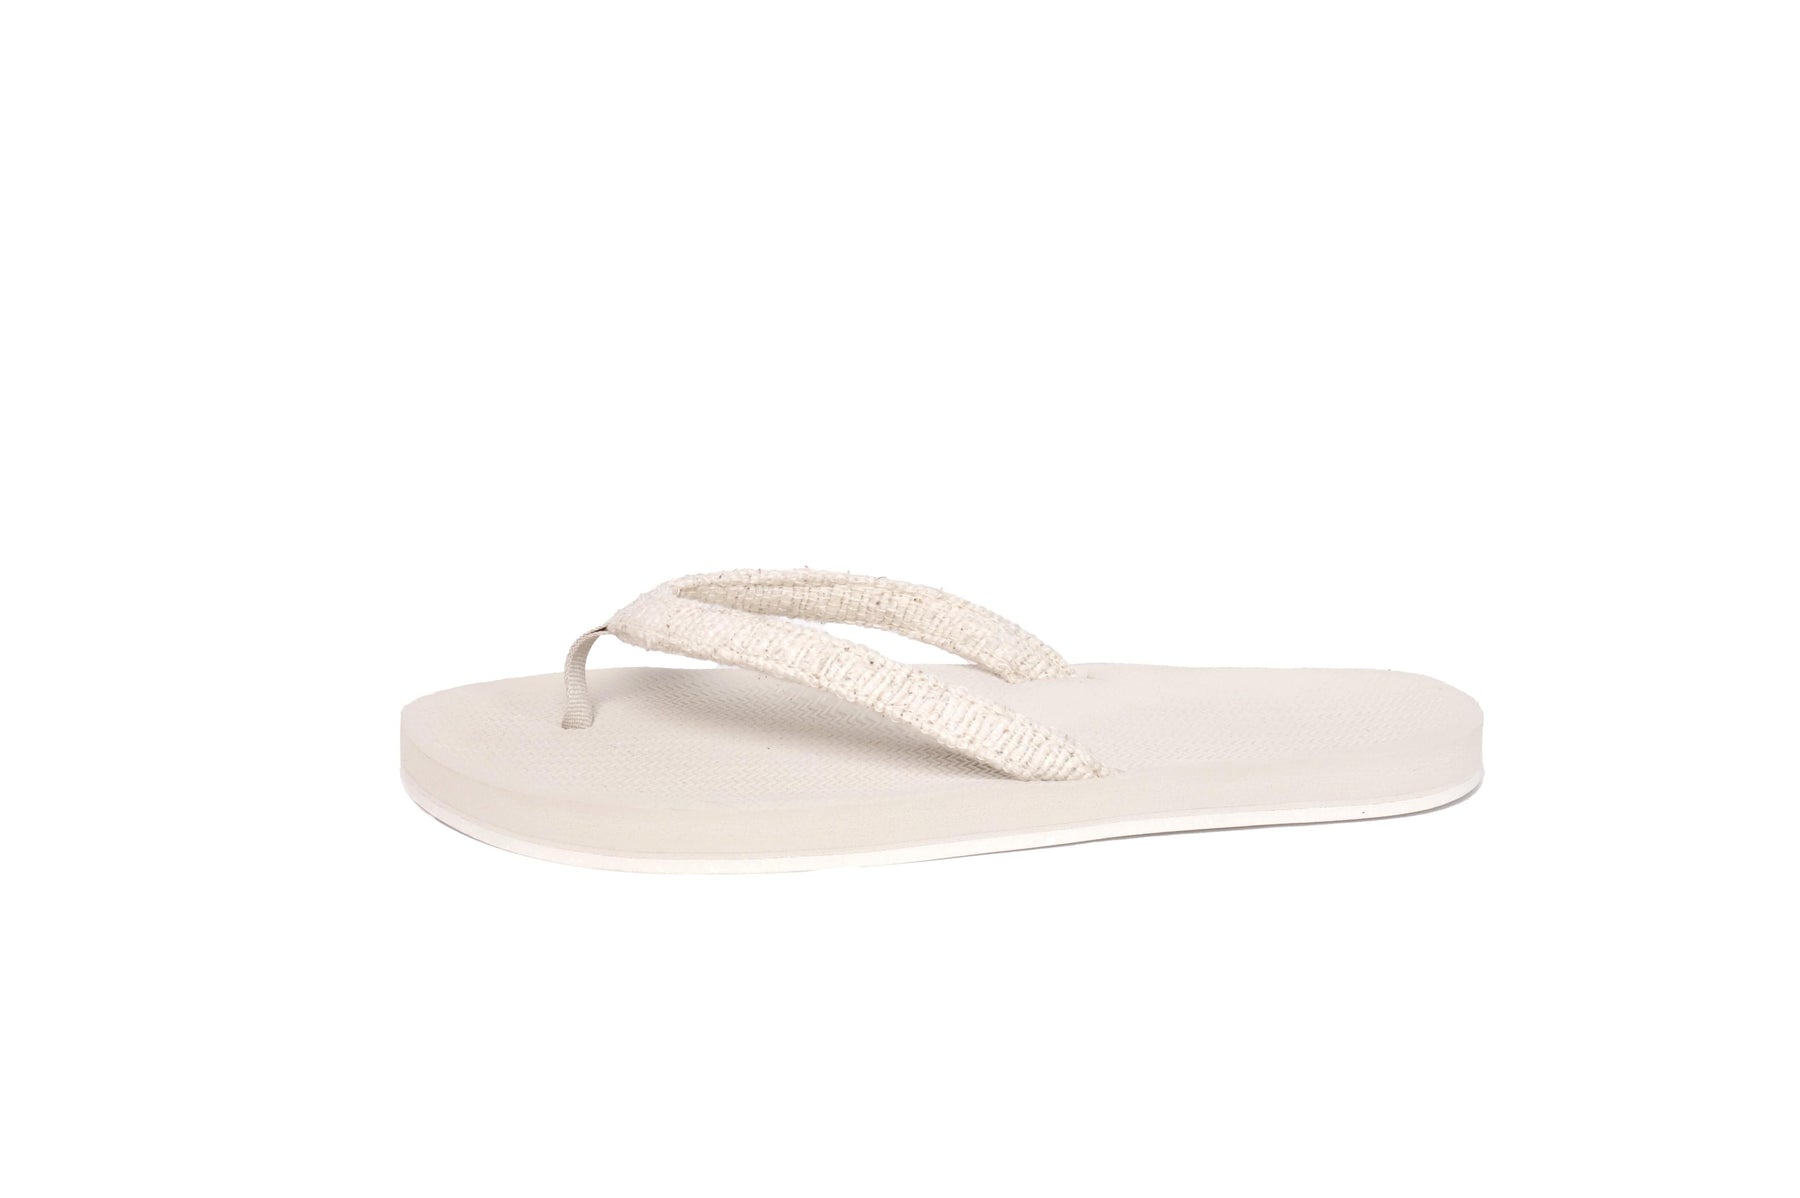 Women's Flip Flops Recycled Pable Straps - Natural/Sea Salt